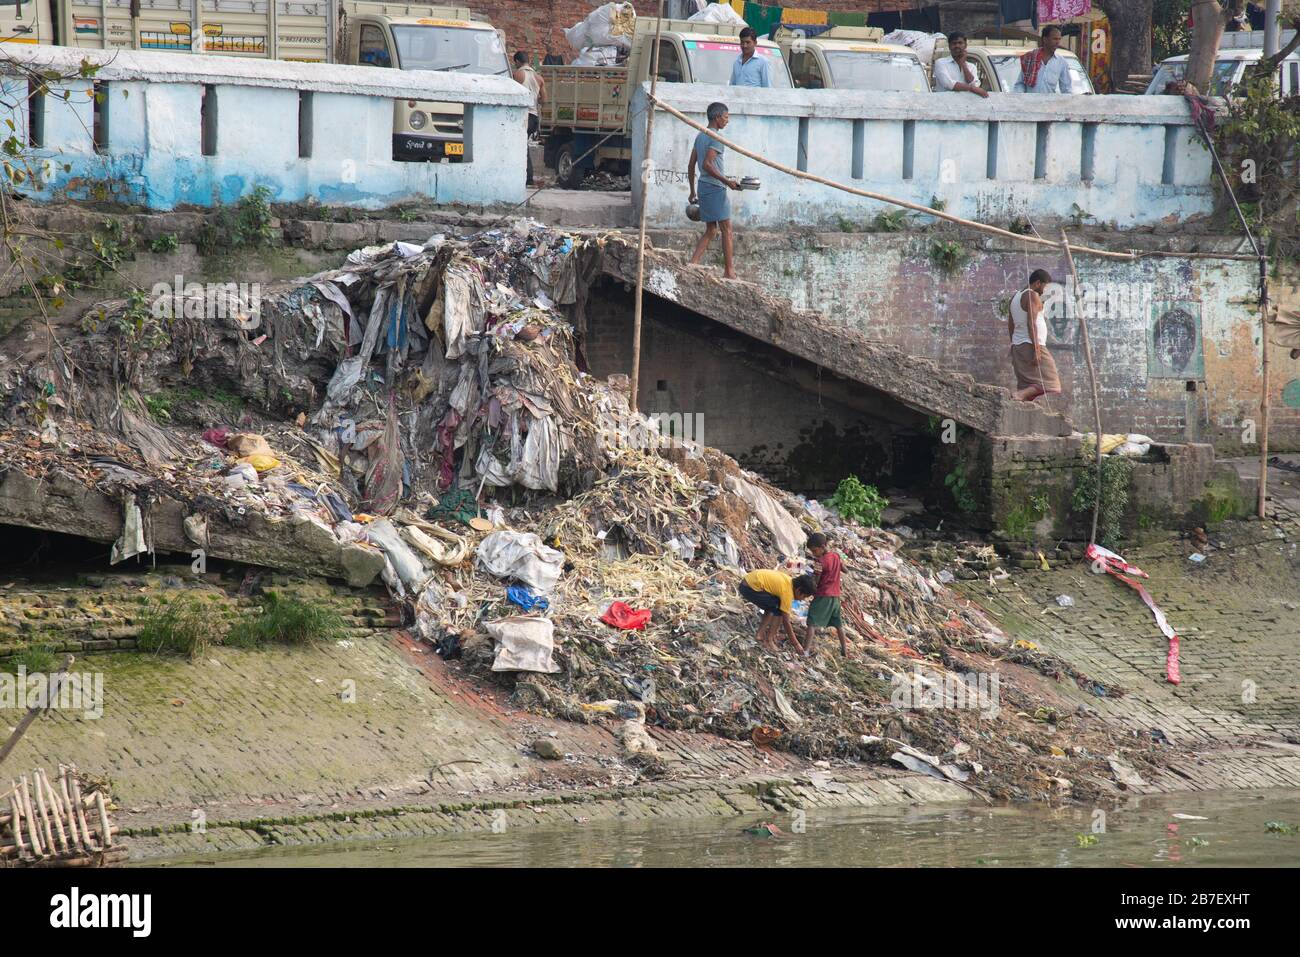 garbage and waste alongside riverbank of Hooghly river in Calcutta, India Stock Photo